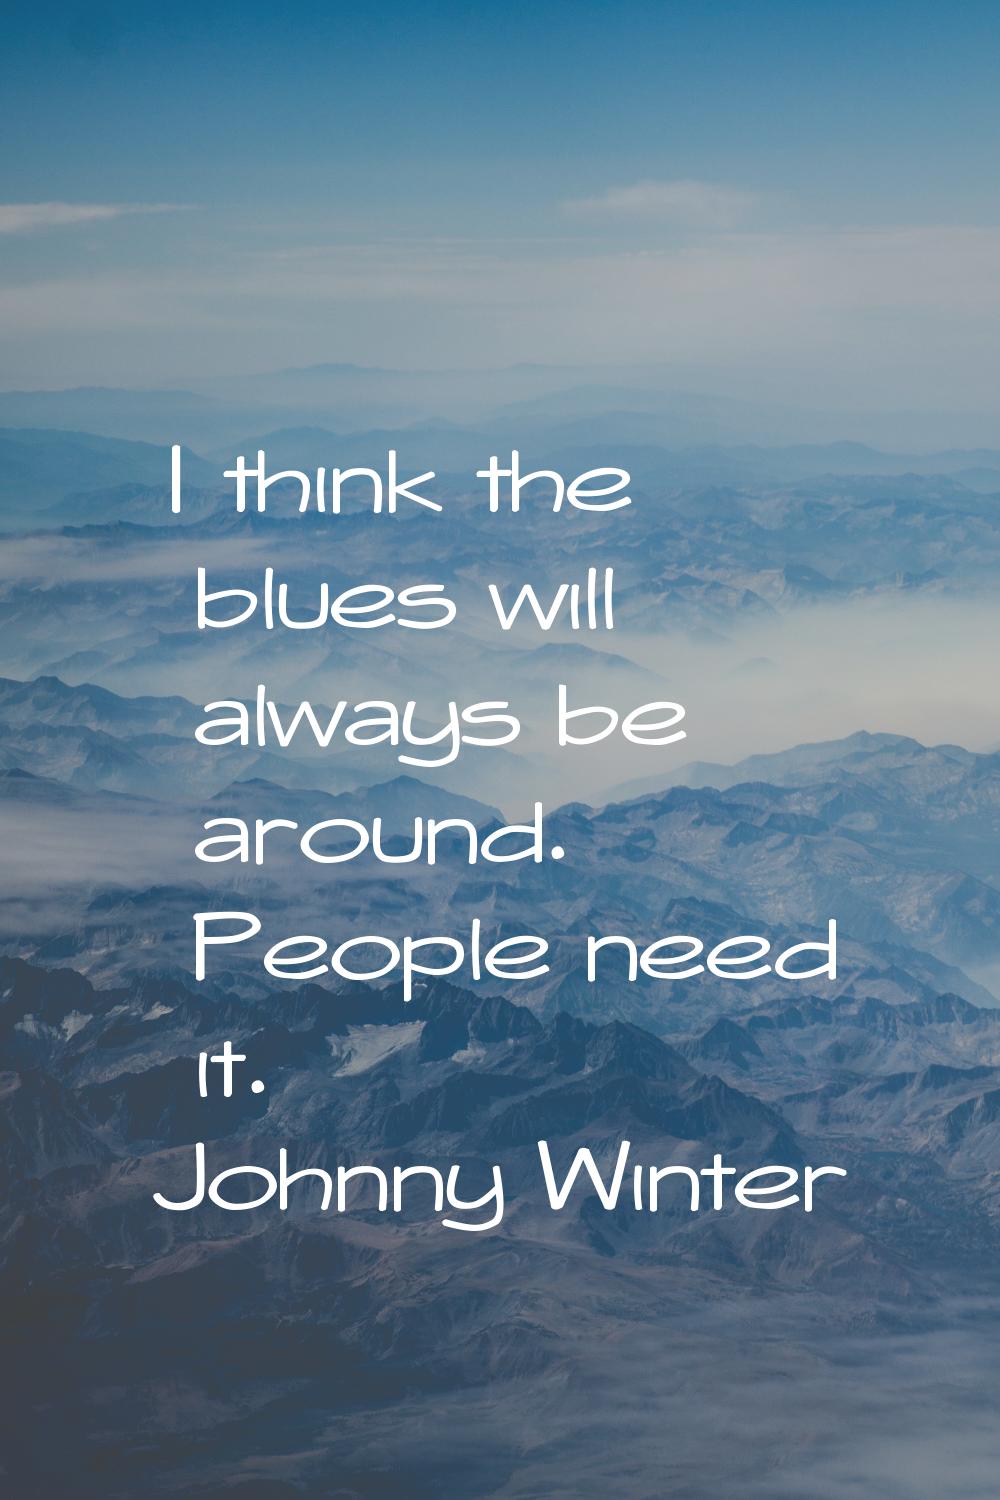 I think the blues will always be around. People need it.